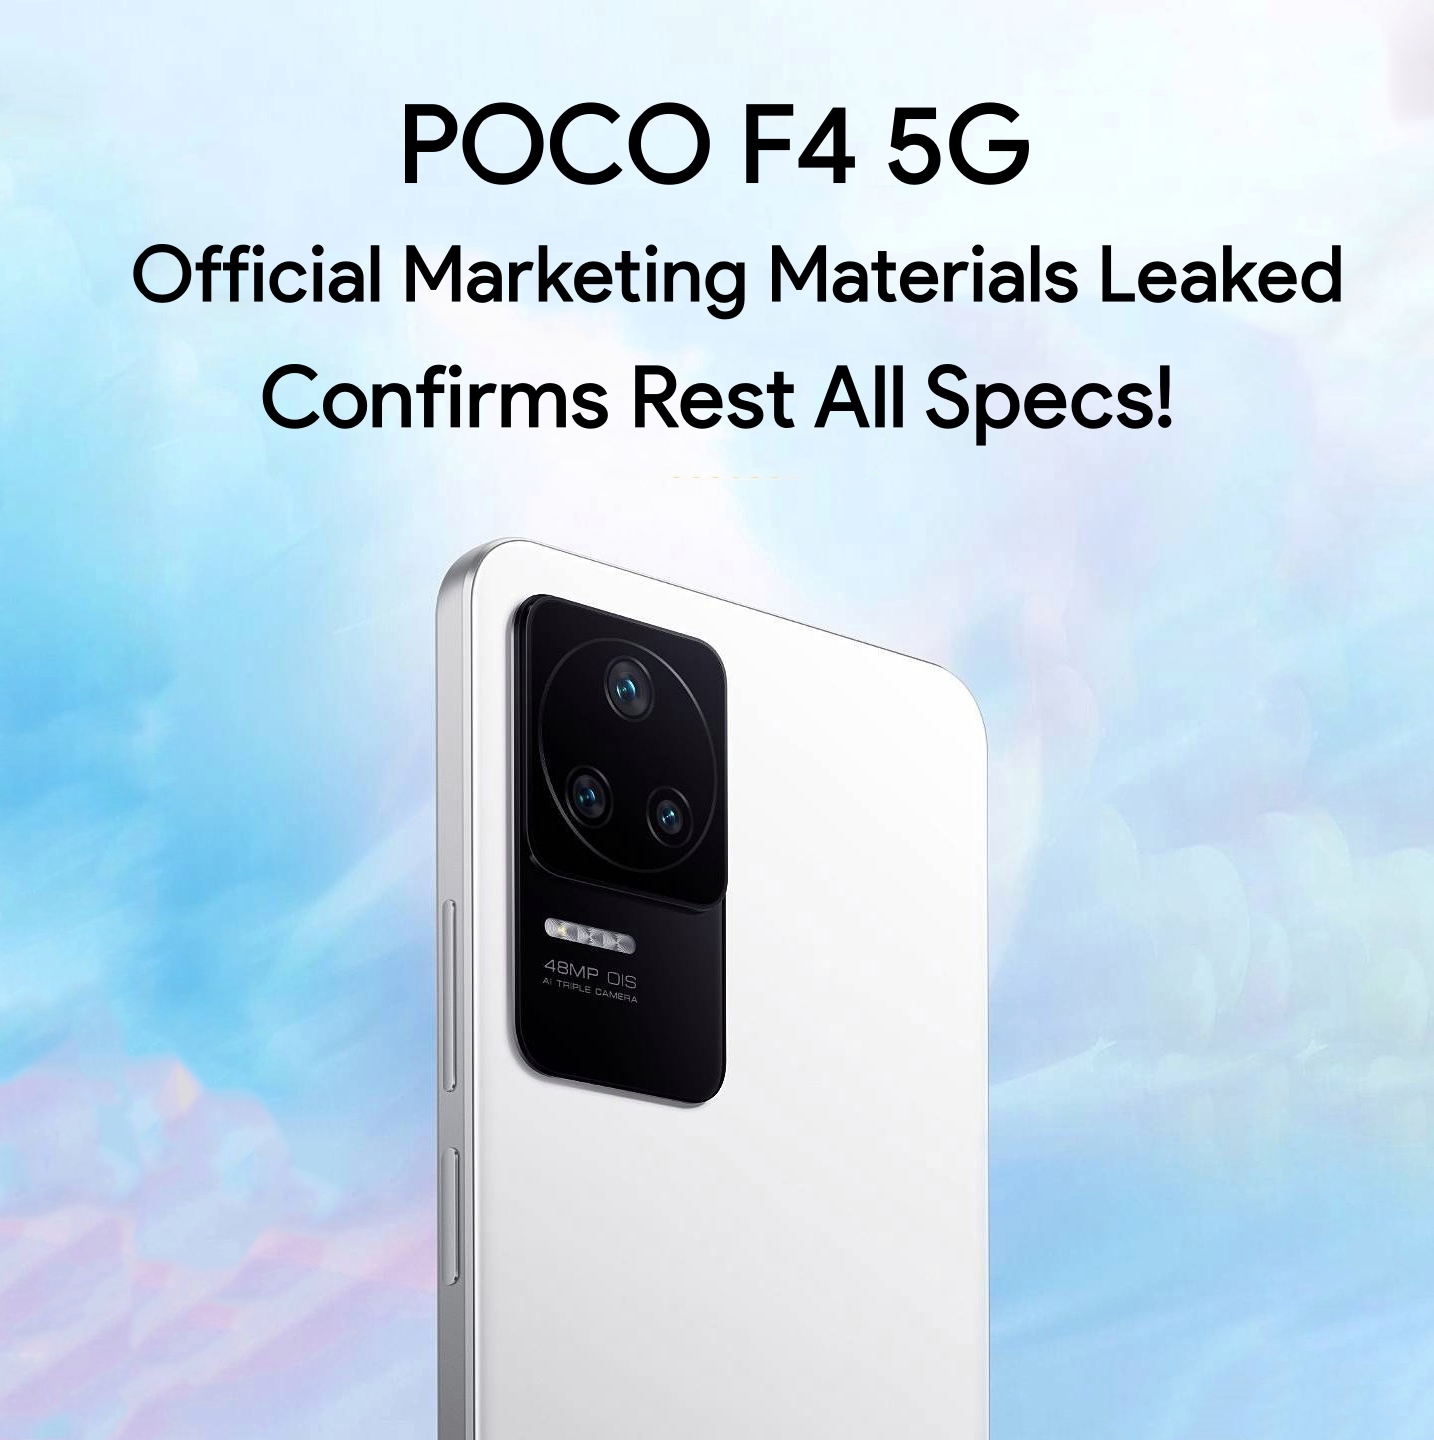 Poco F4 5G launch highlights: Poco F4 5G launched with Snapdragon 870